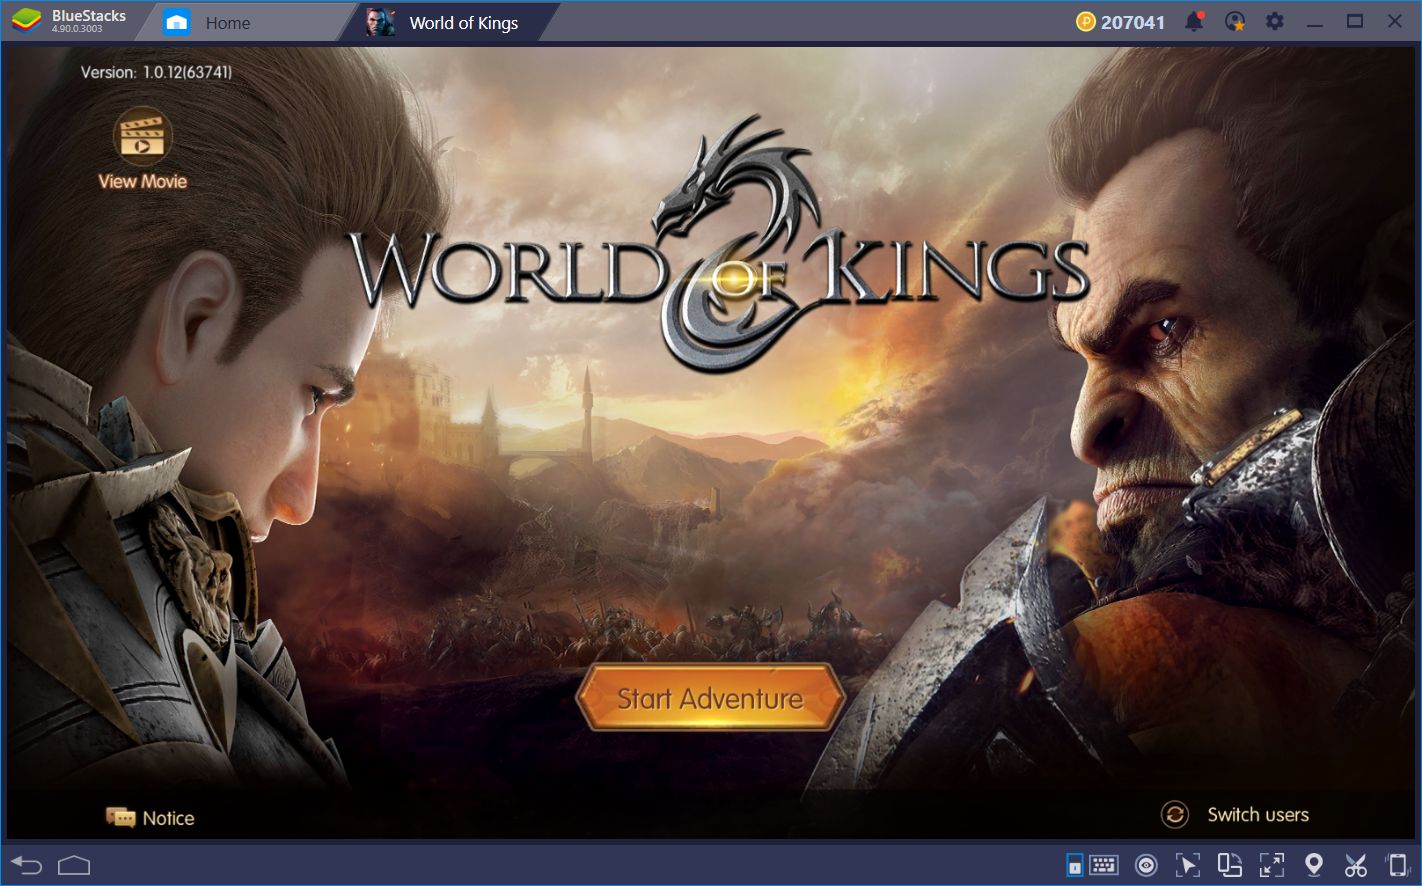 World of Kings: Like World of Warcraft, but on Android